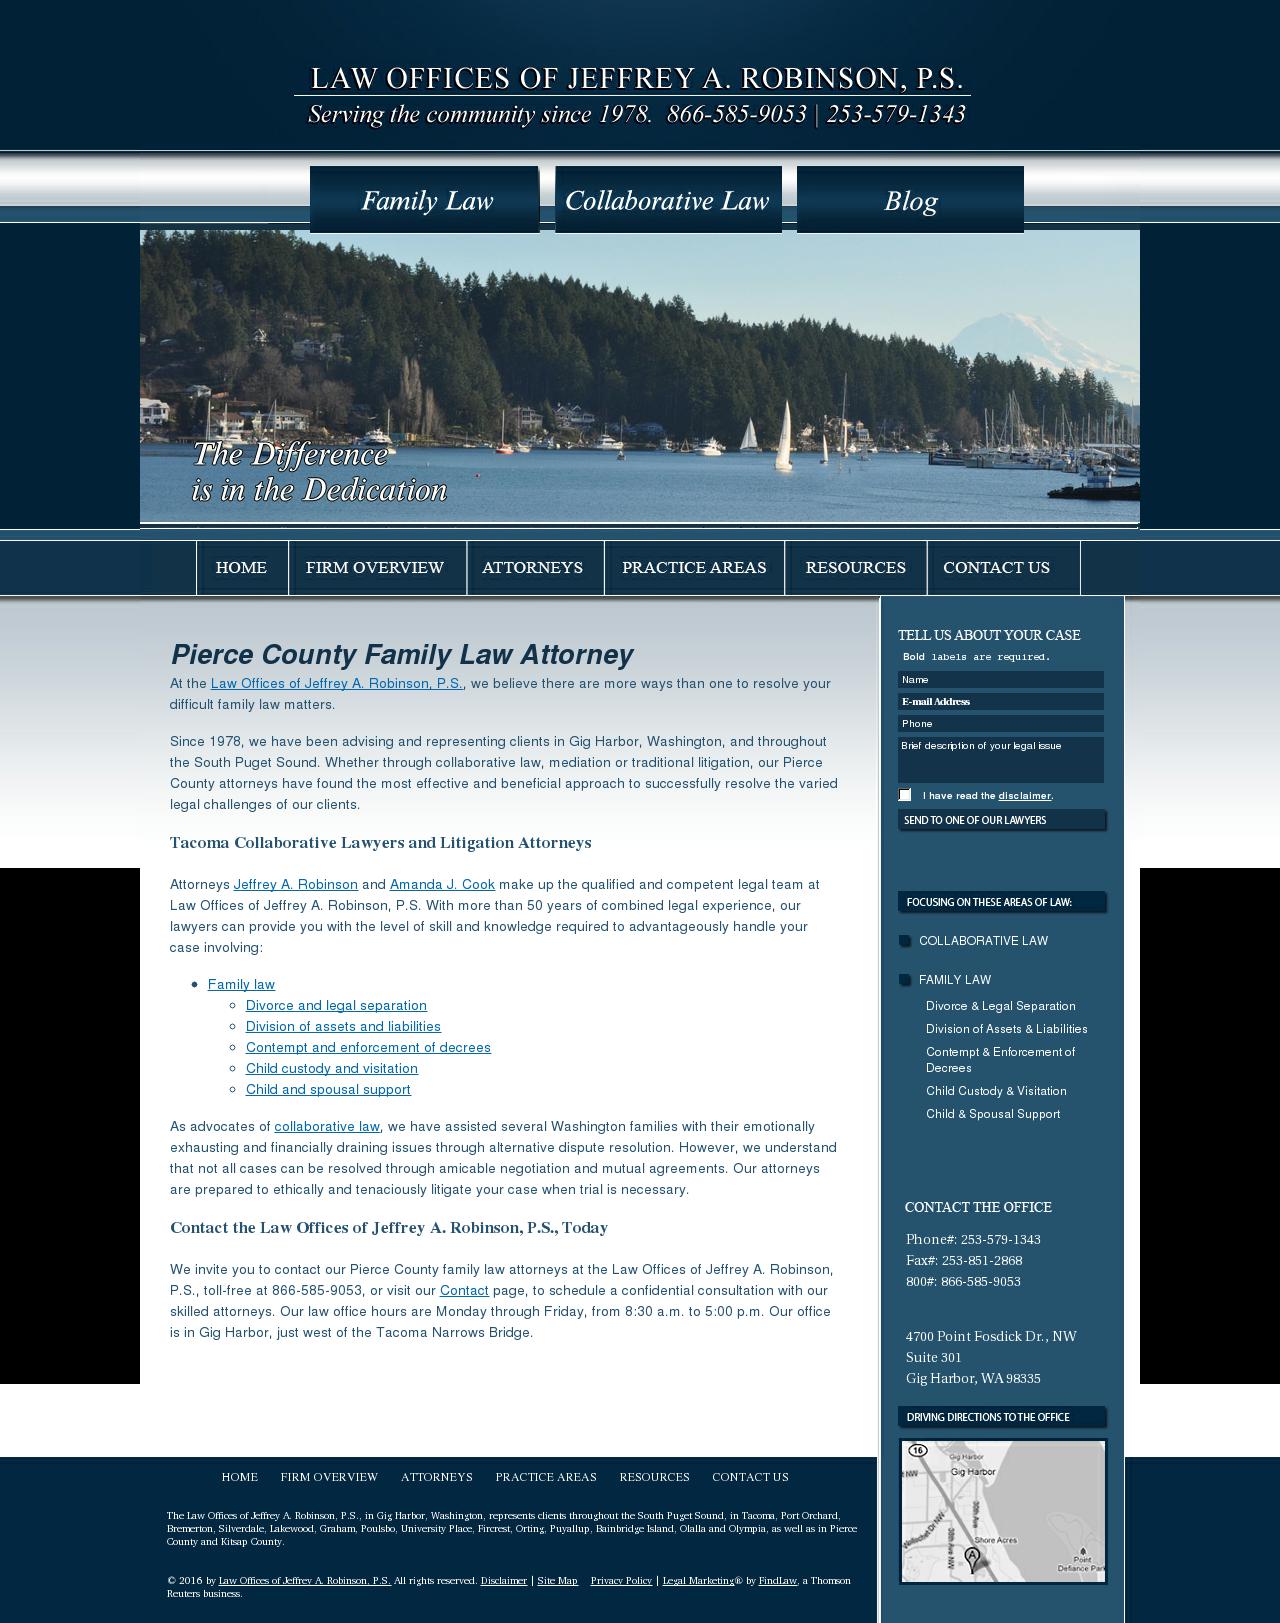 Law Offices of Jeffrey A. Robinson, P.S. - Gig Harbor WA Lawyers